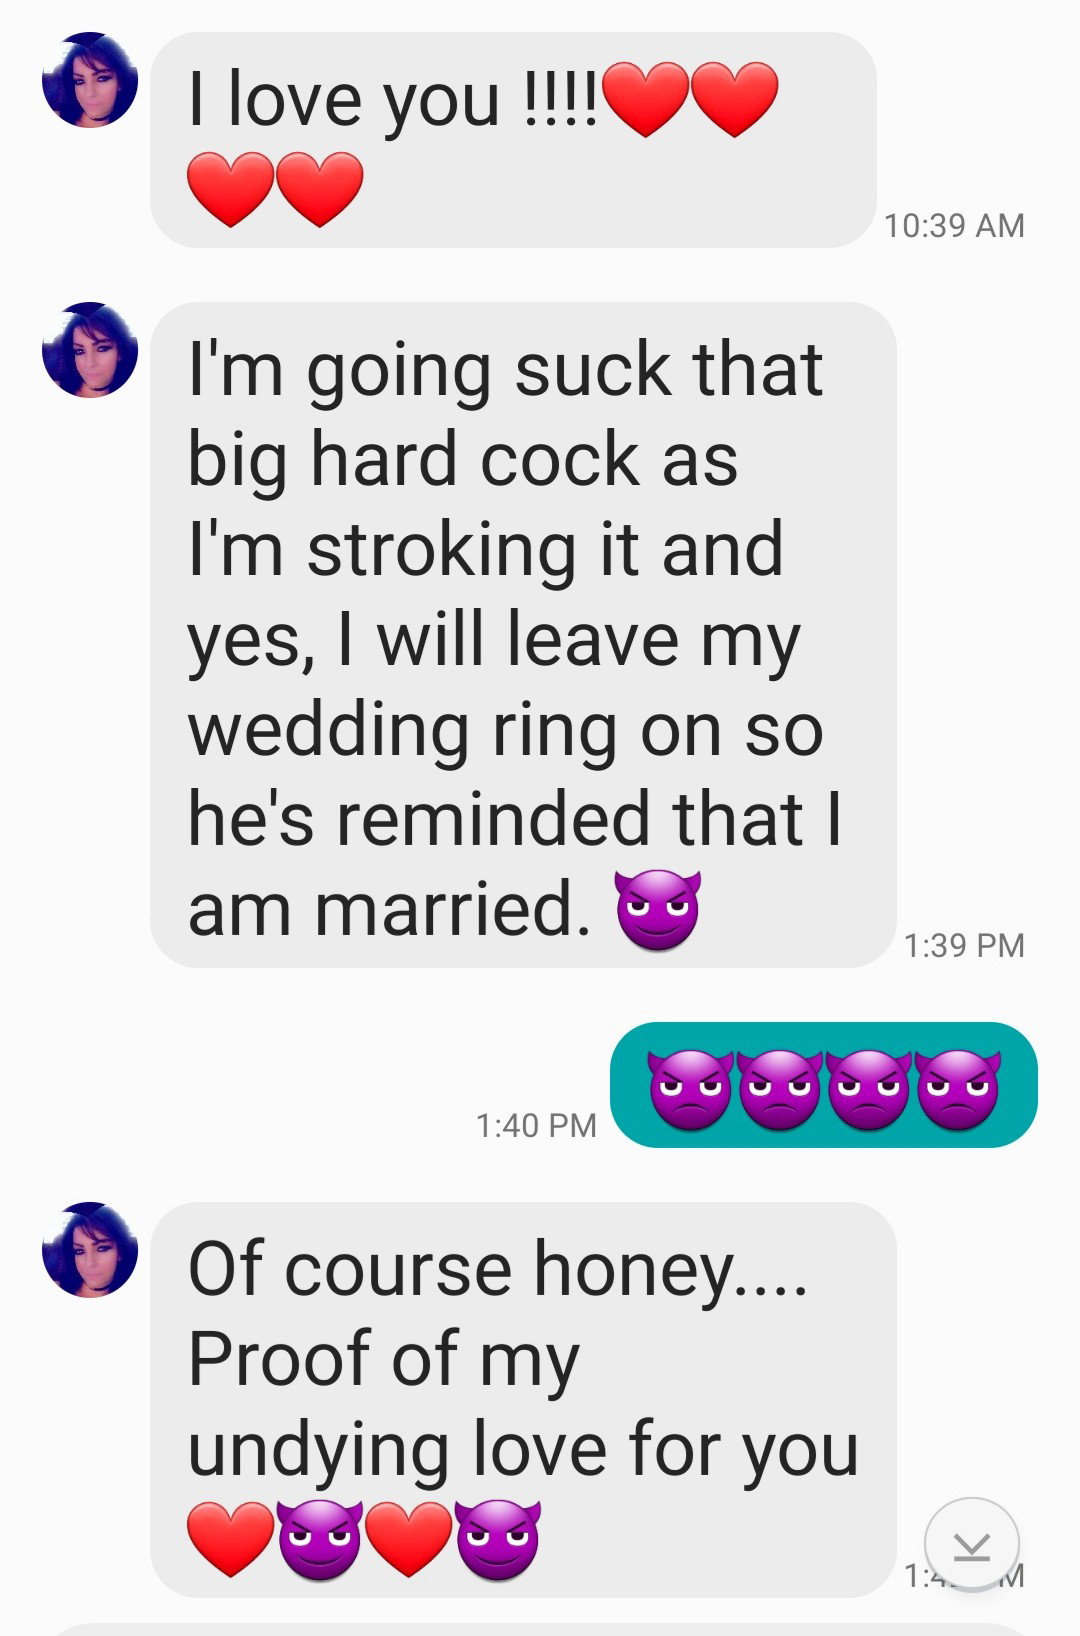 Photo by Sixfive with the username @Sixfive, who is a verified user,  September 10, 2019 at 12:35 AM. The post is about the topic Hotwife Texts and the text says 'https://sharesome.com/Blueeyes13 baby do you remember these texts? 🔥🔥🔥👿👿👿❤❤❤'